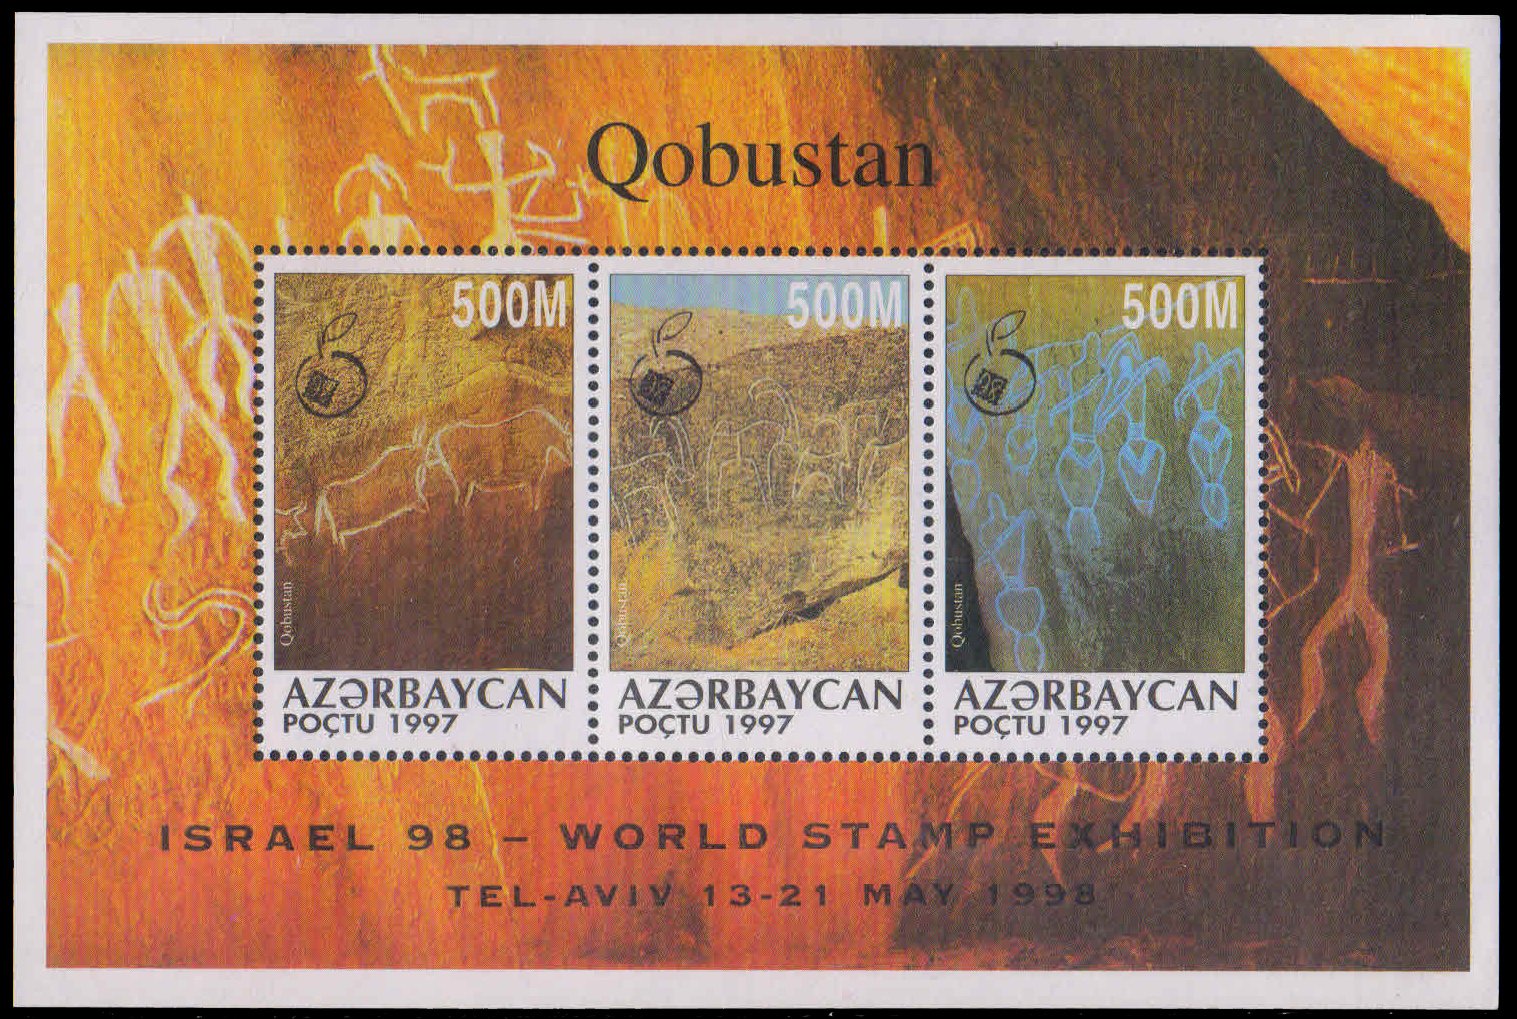 AZERBAIJAN 1998-Israel 98 Int. Stamp Exhibition, Oobustash Rock Carving, M/S of 3 Stamps, MNH, S.G. MS 435, Cat £ 14.50